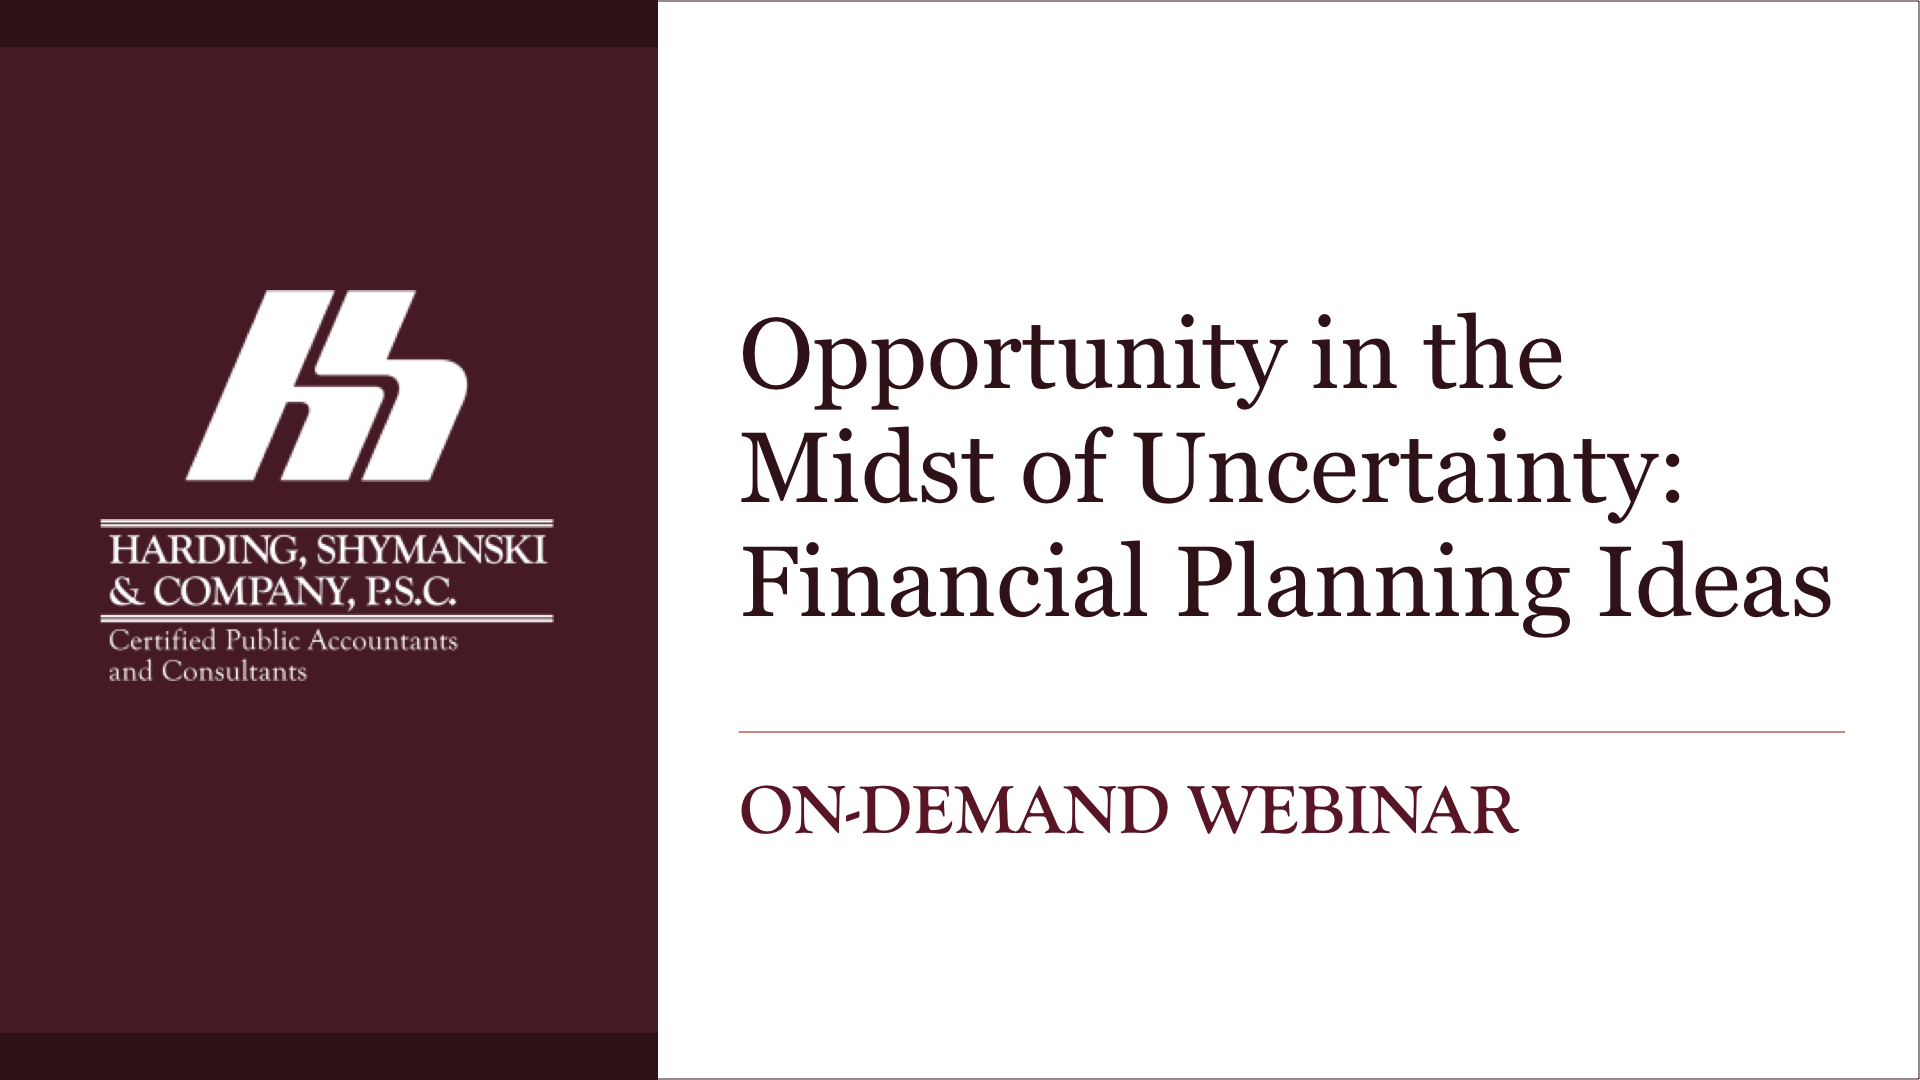 Opportunity in the Midst of Uncertainty: Financial Planning Ideas